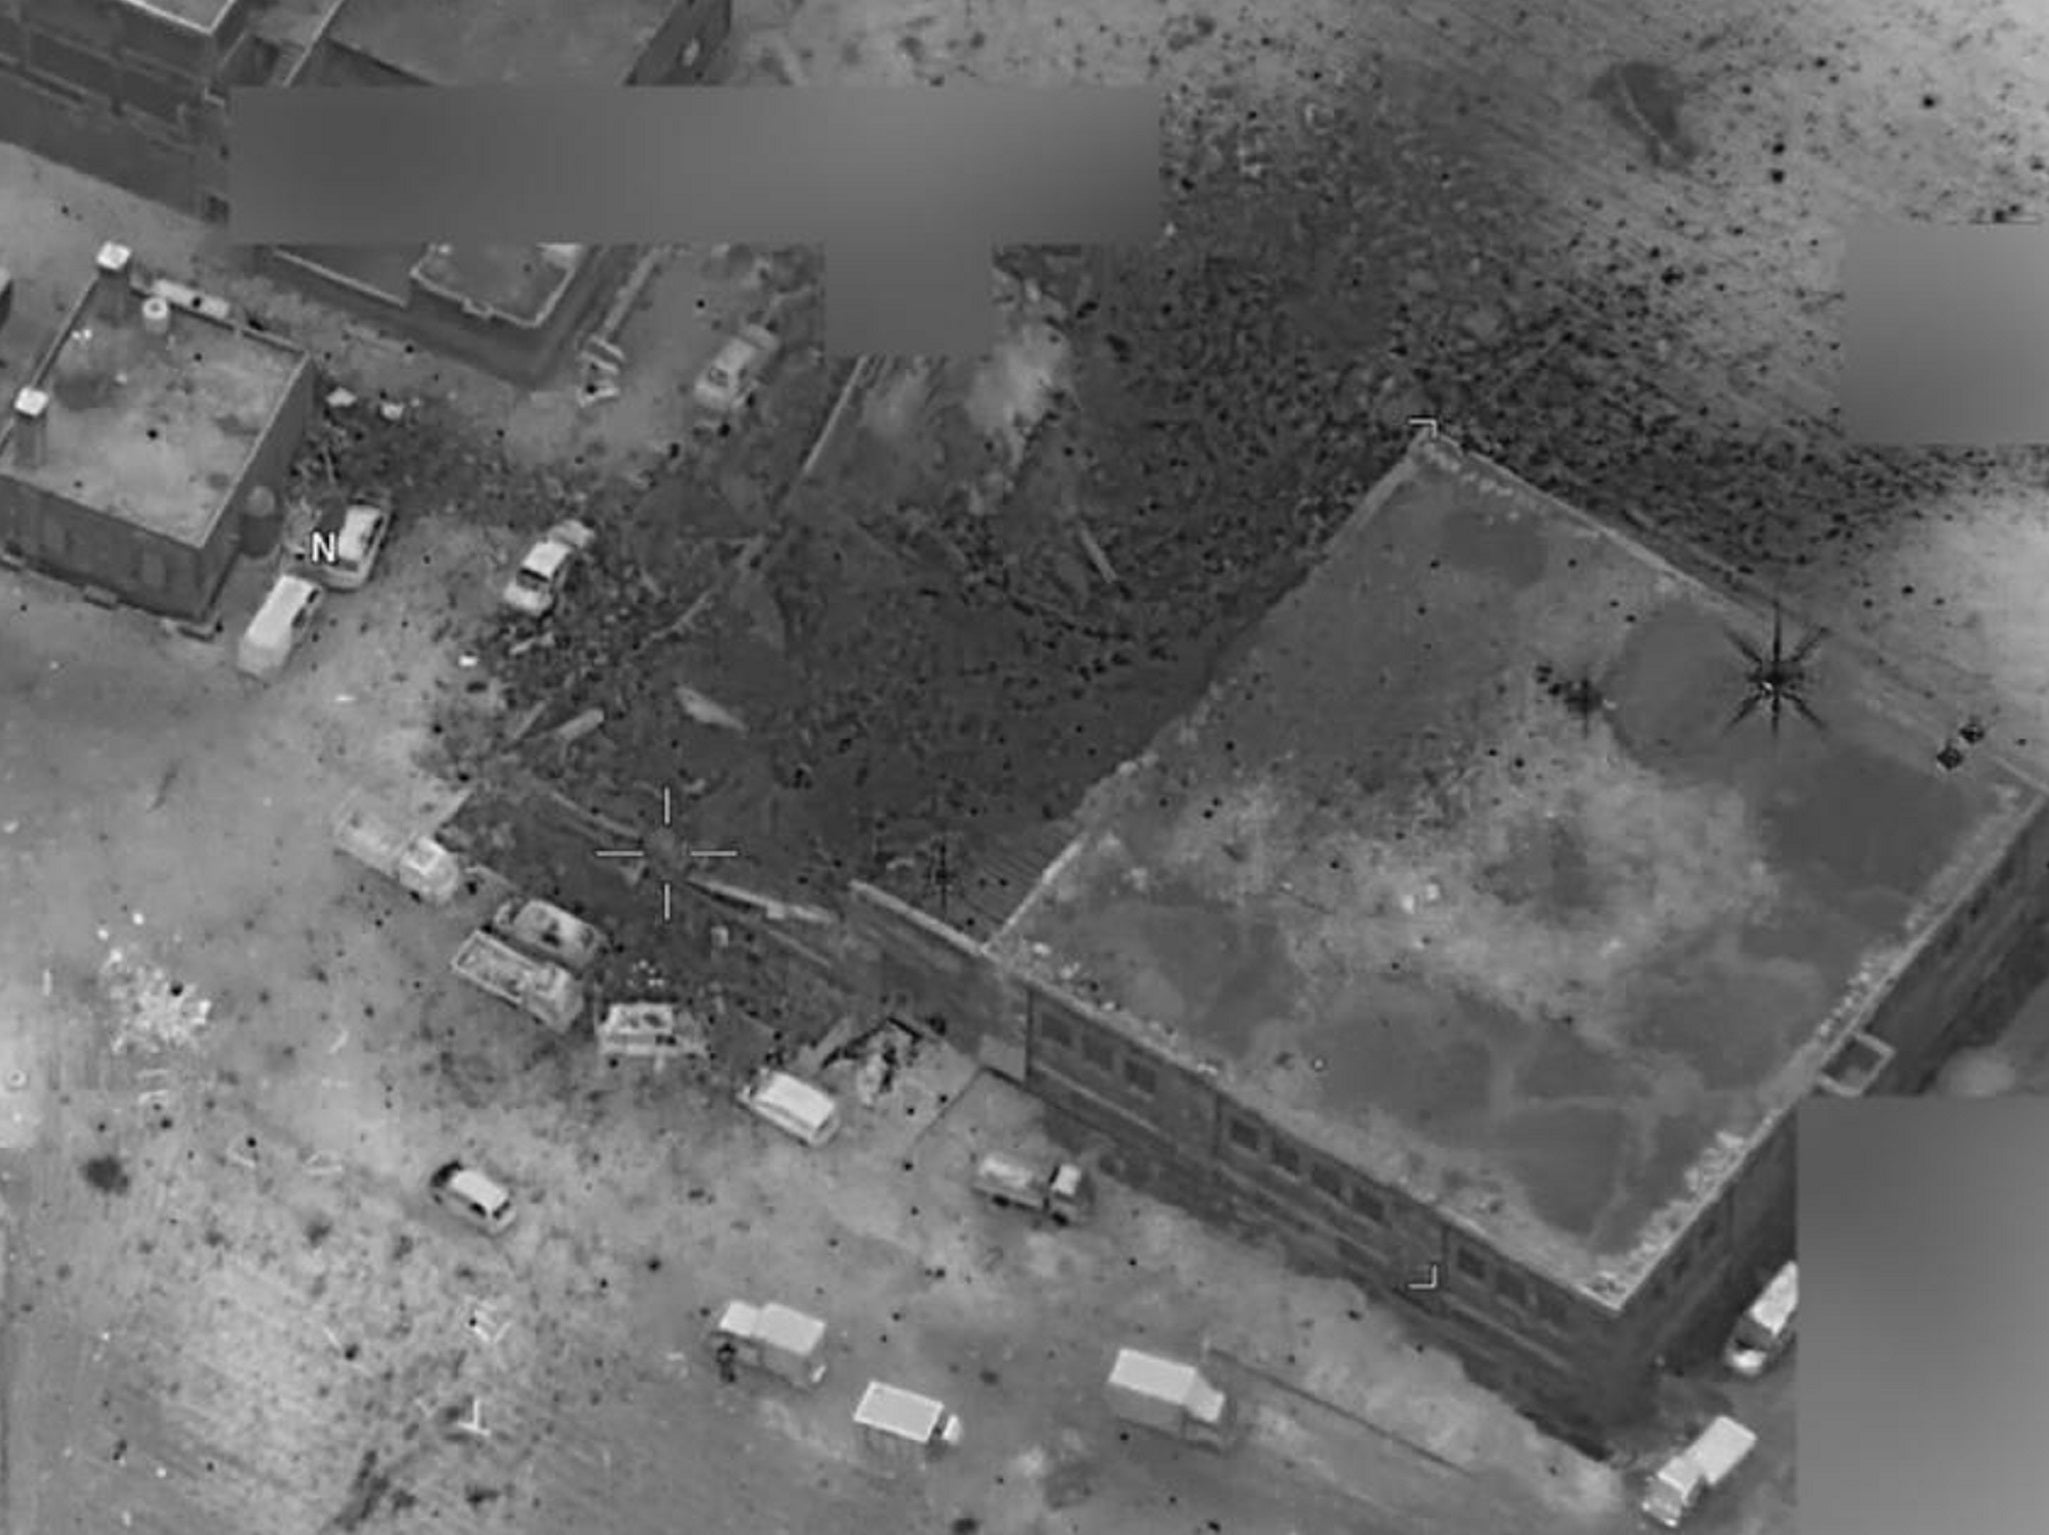 Aerial photograph shows damage inflicted in the bombing